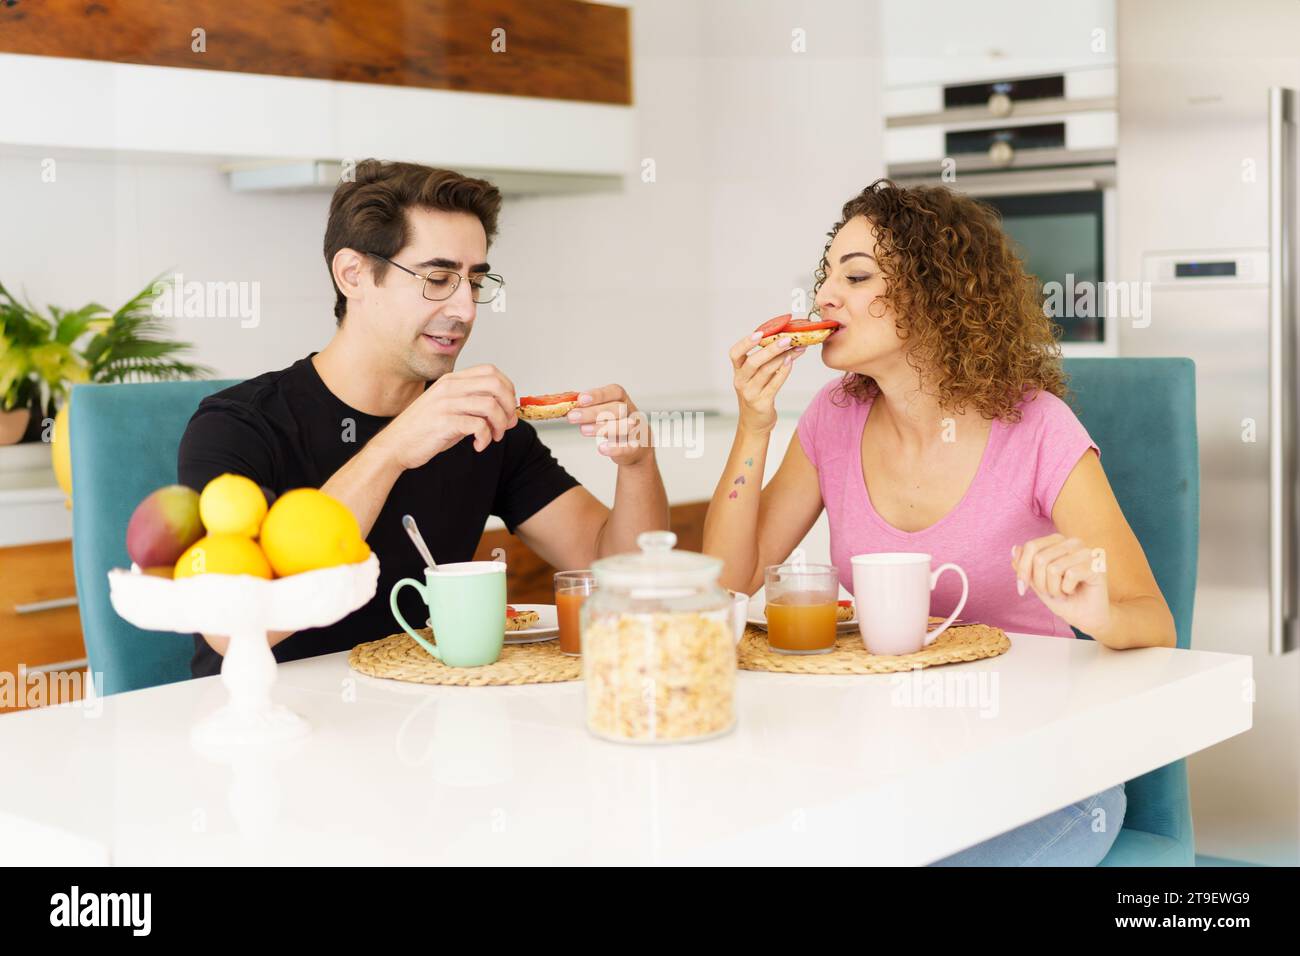 Happy adult couple in conversation and looking down while sitting at dining table in kitchen with juice in glasses, on placemat near fruits in bowl an Stock Photo